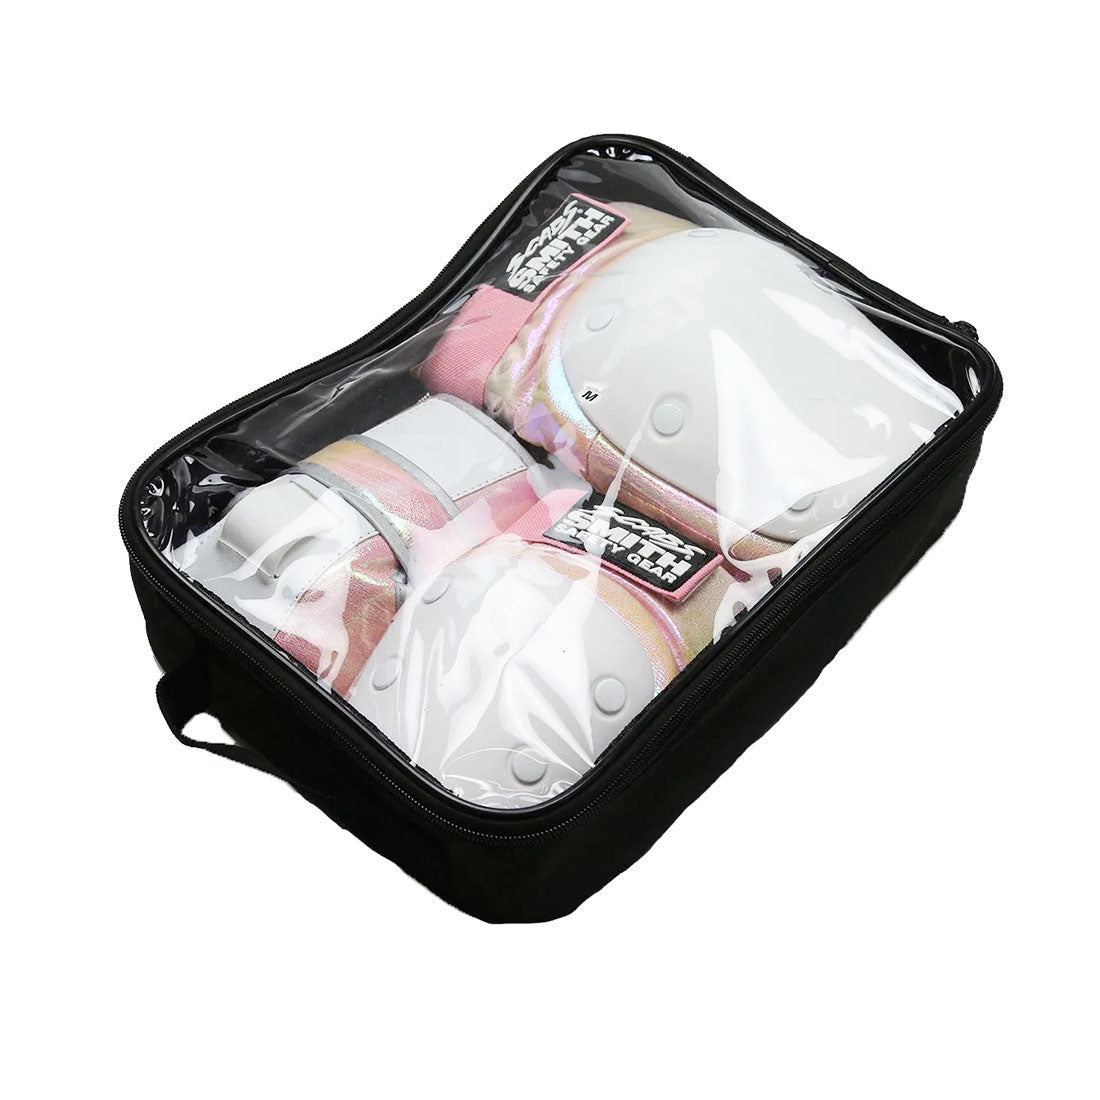 Smith Scabs Adult Tri Pack - Cotton Candy Protective Gear